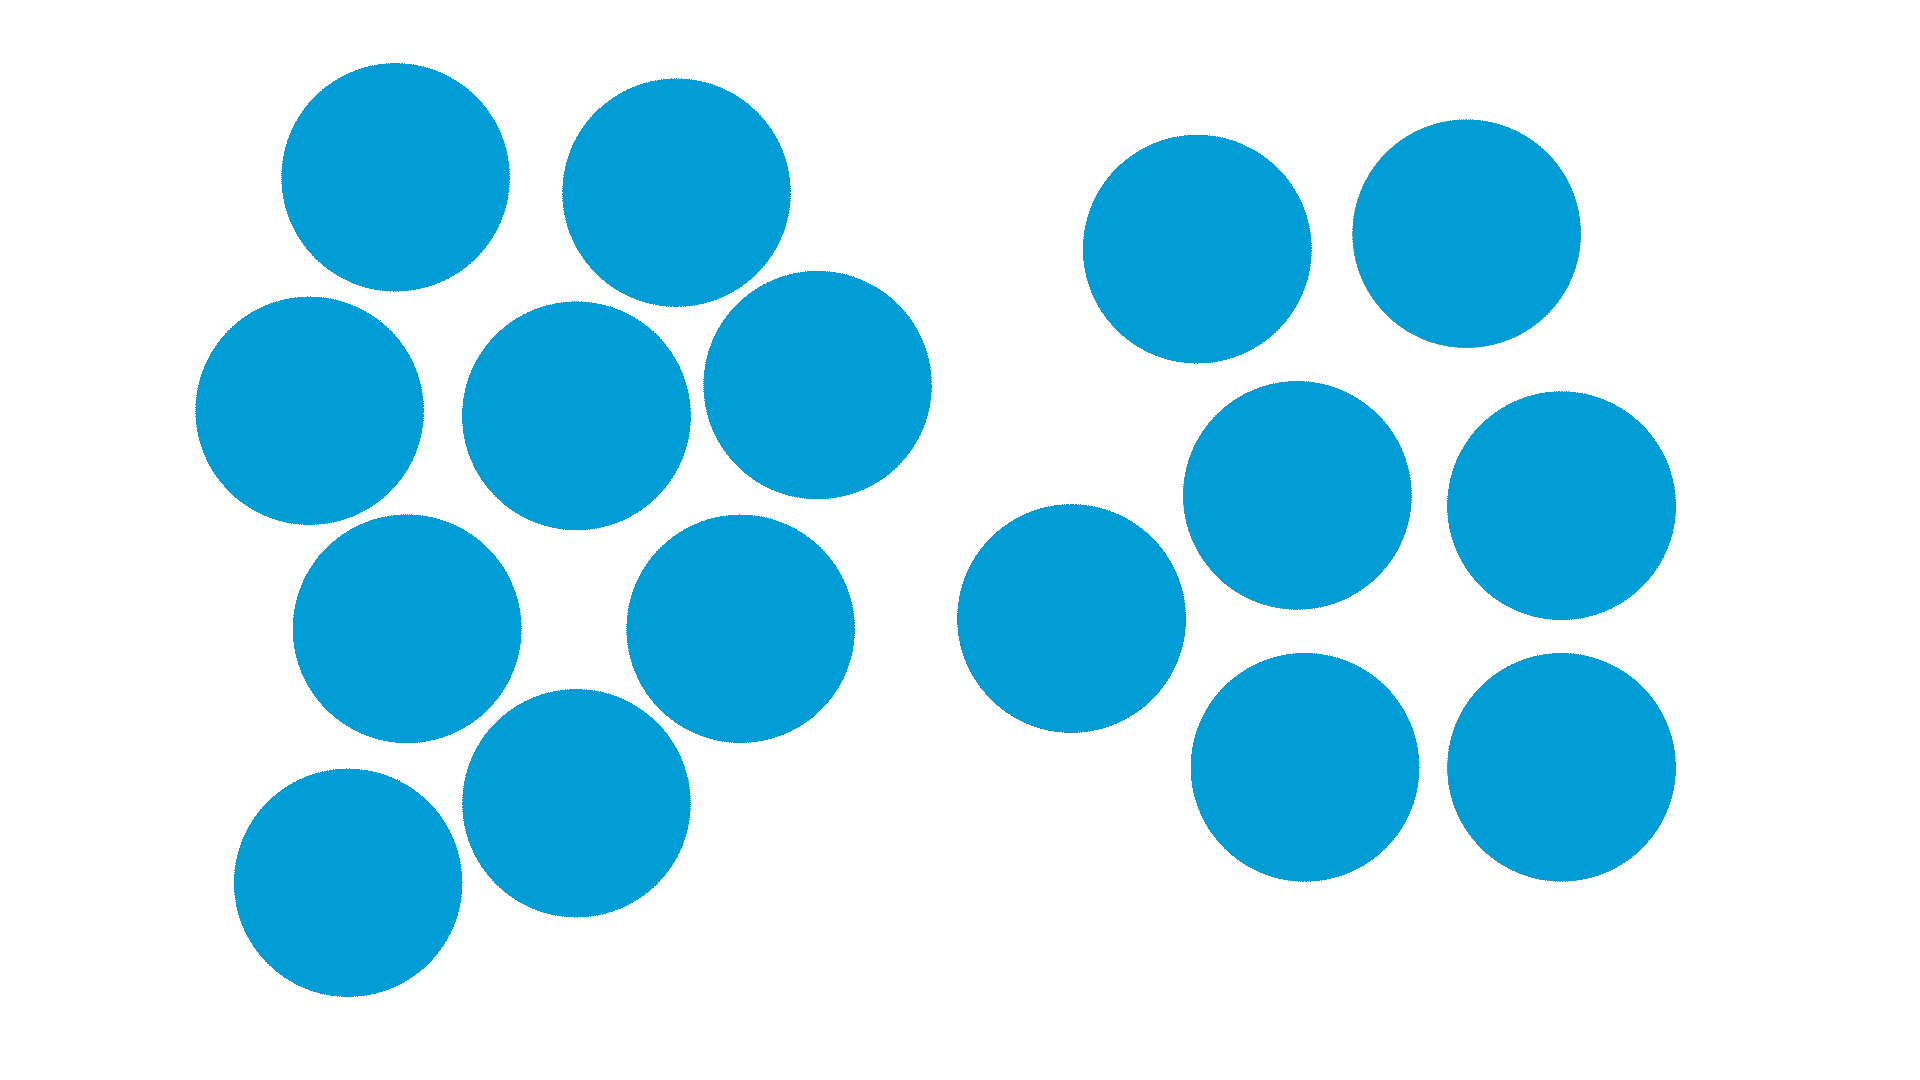 This animation shows the transformation of many different-sized and different-coloured circles to uniformly-sized, blue circles.